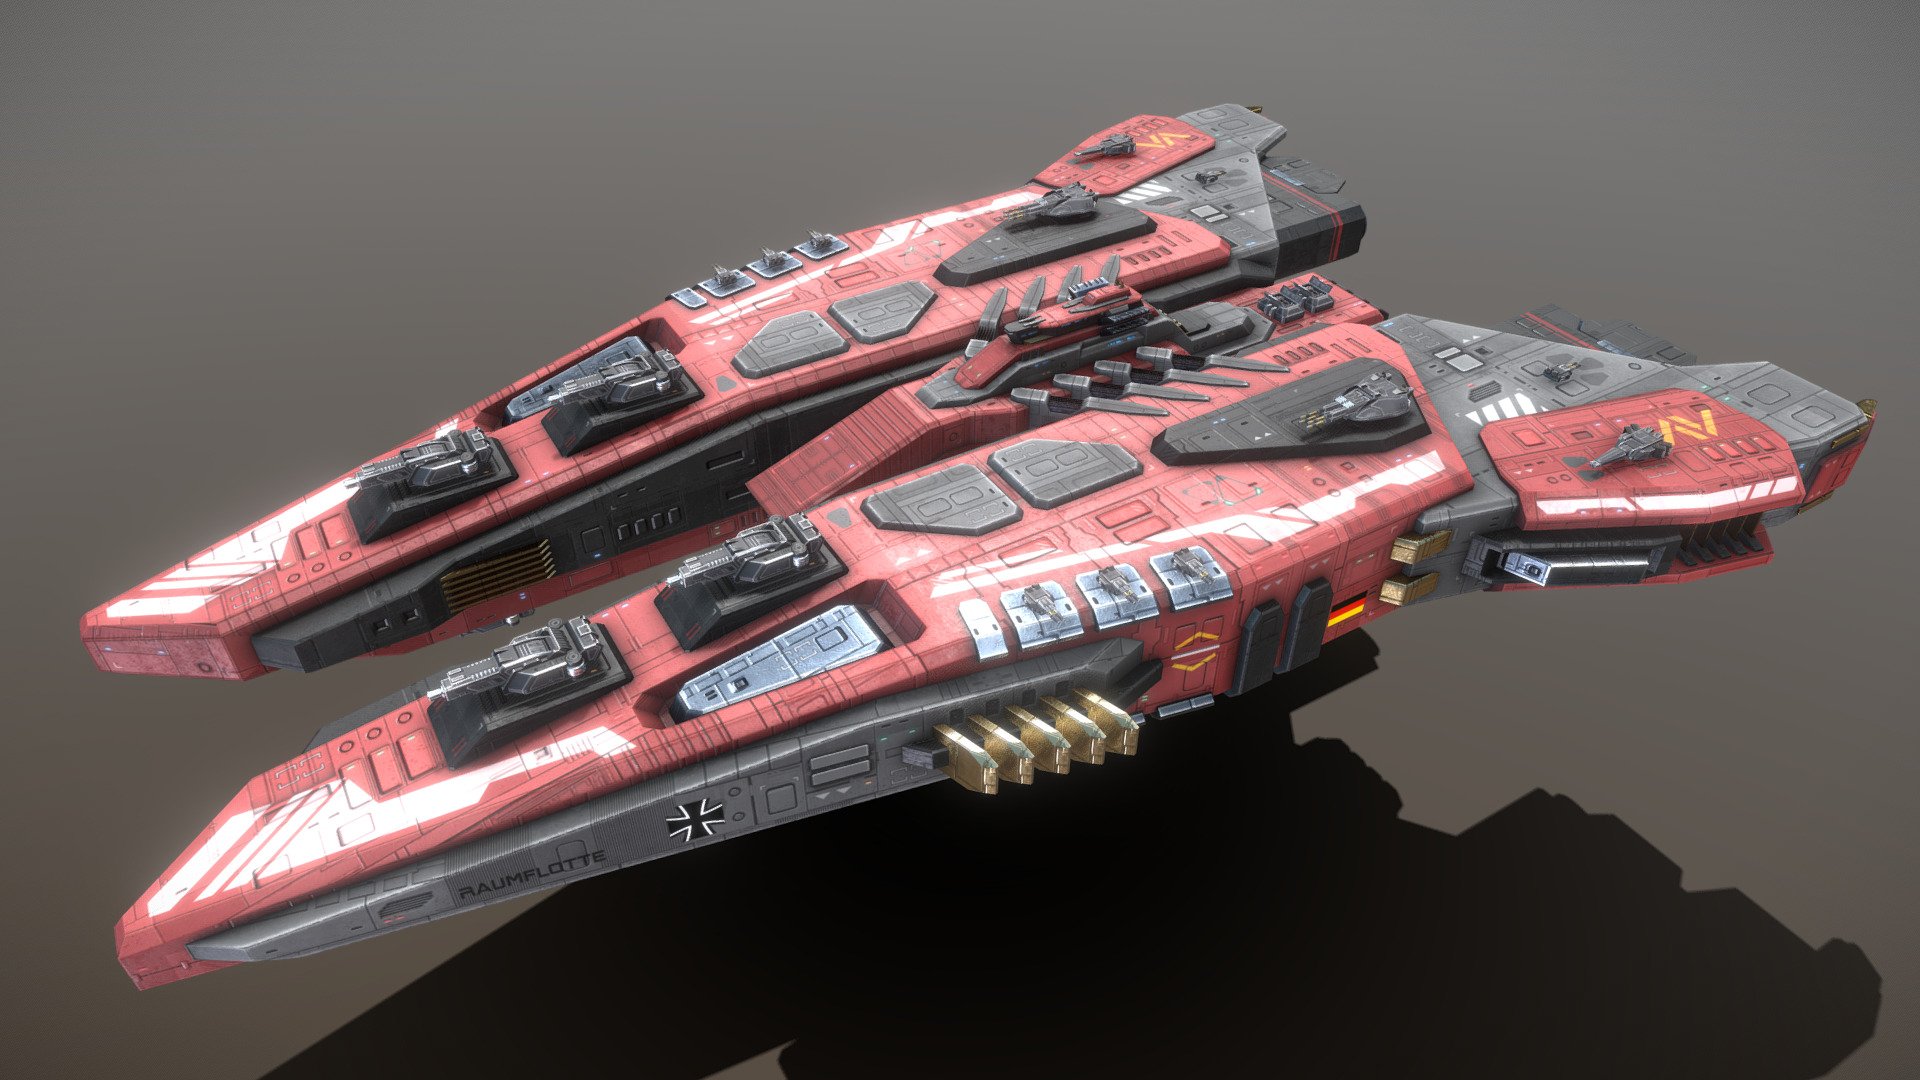 This is a model of a low-poly and game-ready scifi spaceship. 

The weapons are separate meshes and can be animated with a keyframe animation tool. The weapon loadout can be changed too. 

This model has optional maneuvering thrusters for newtonian physics based movement. They do fit on other ships too.

The model comes with several differently colored texture sets. The PSD file with intact layers is included.

Please note: The textures in the Sketchfab viewer have a reduced resolution (2K instead of 4K) to improve Sketchfab loading speed.

If you have purchased this model please make sure to download the “additional file”.  It contains FBX and OBJ meshes, full resolution textures and the source PSDs with intact layers. The meshes are separate and can be animated (e.g. firing animations for gun barrels, rotating turrets, etc) 3d model